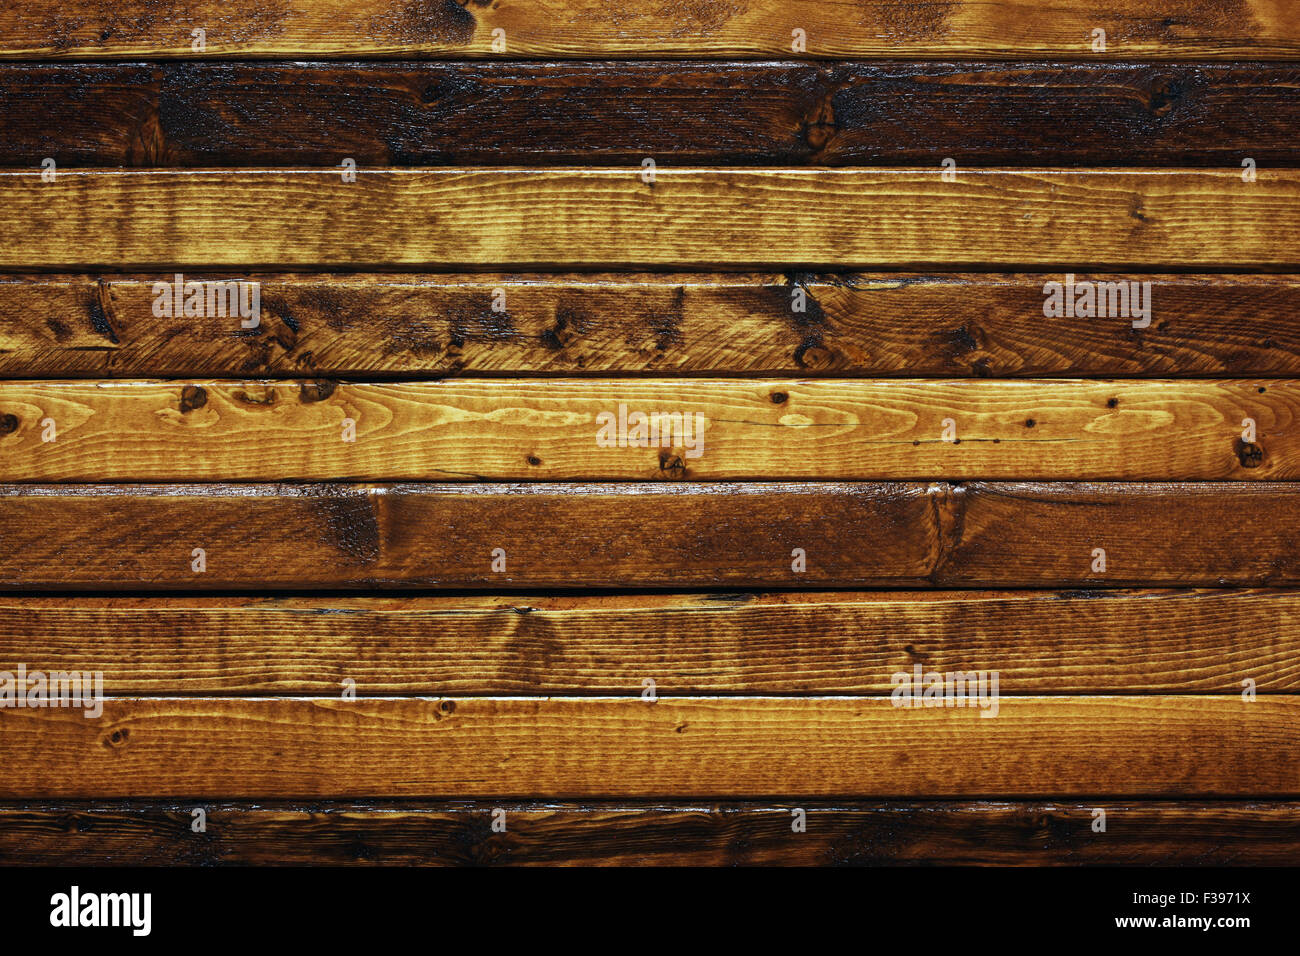 Striped wooden background Stock Photo